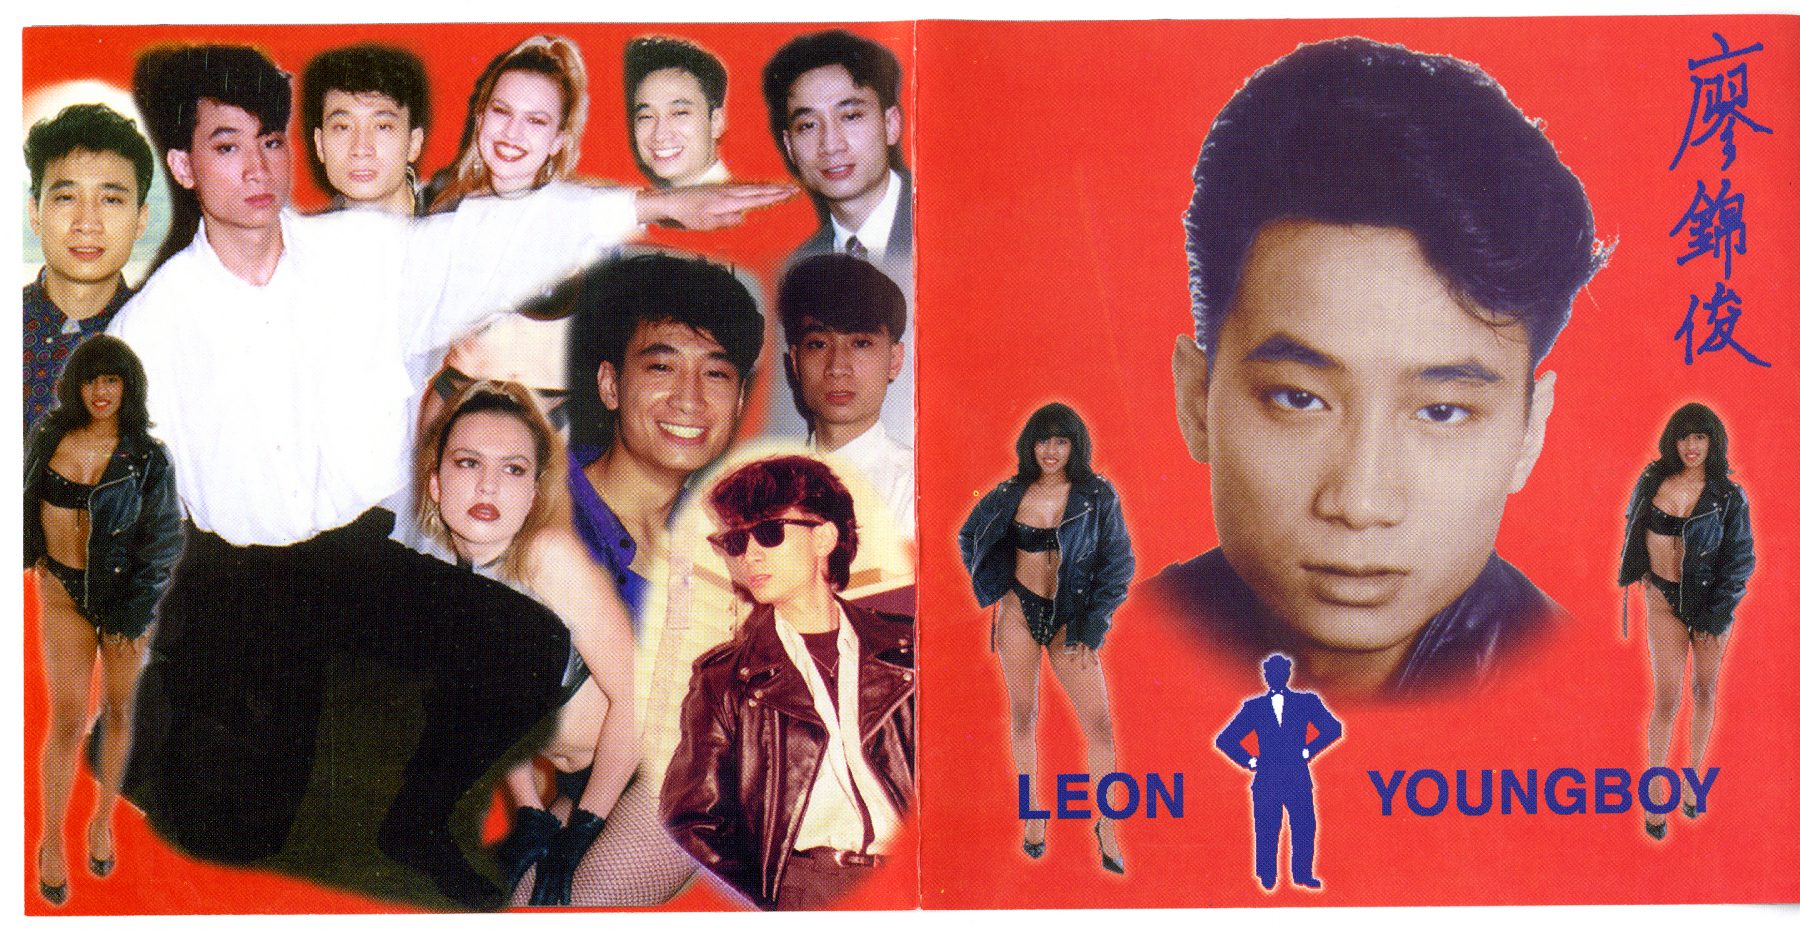 03 May 2019 Posted.
Leon Youngboy, self-titled album, Courtesy of Leonard Liao, Museum of Chinese in America (MOCA) Collection.
Leon Youngboy, 自我命名的唱片，廖锦俊捐赠，美国华人博物馆（MOCA）馆藏